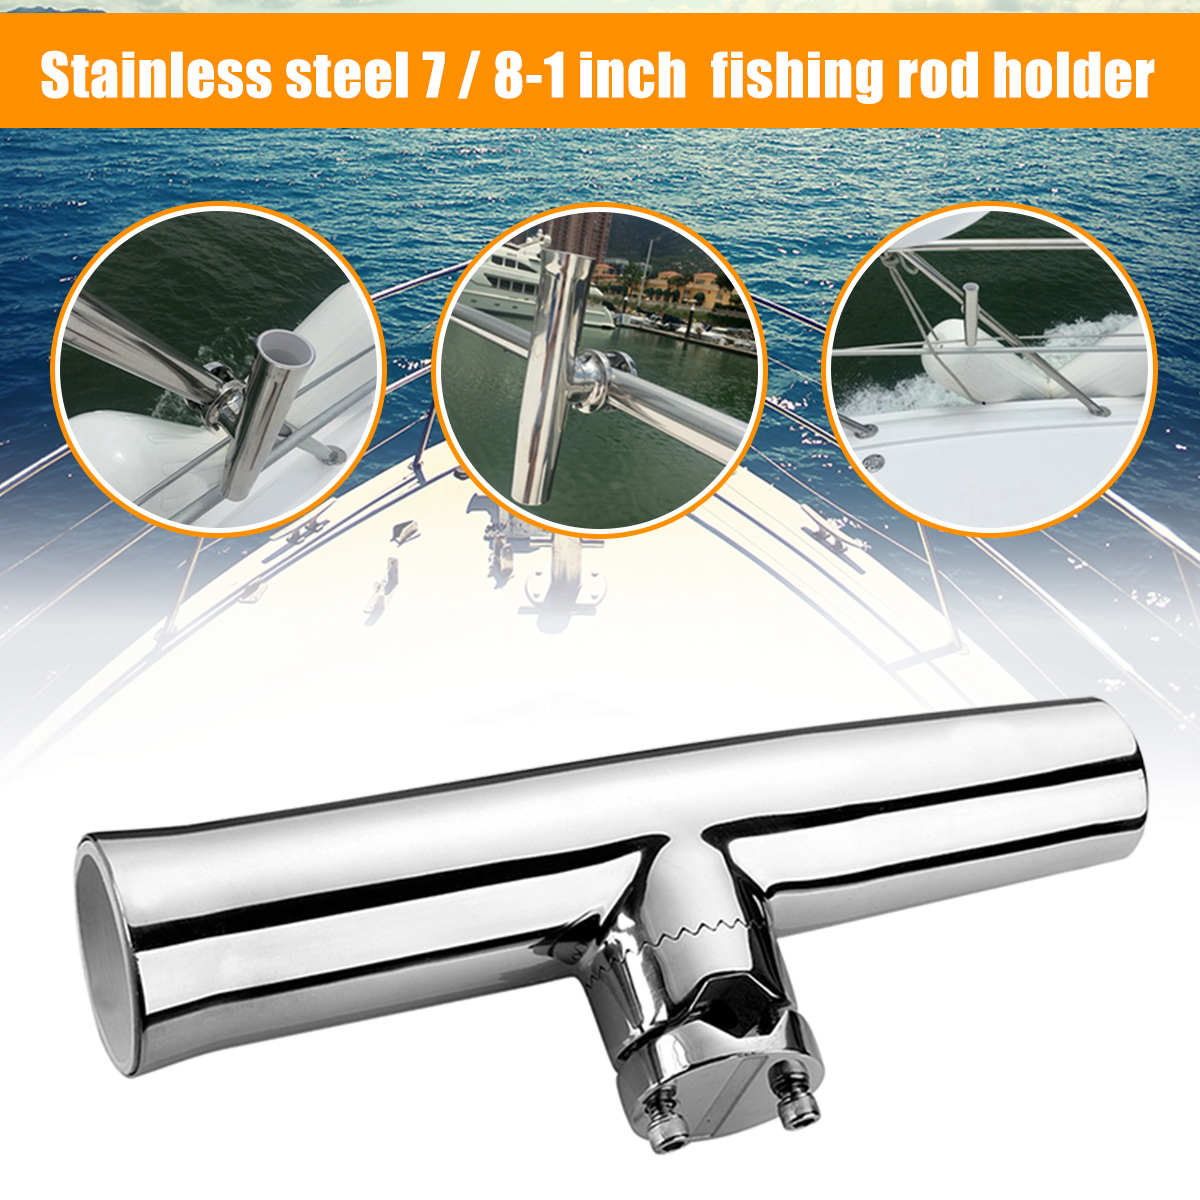 316-Stainless-Steel-78-1-Tube-Fishing-Rod-Holder-Boat-Tackle-Clamp-On-Rail-Mount-1283705-1